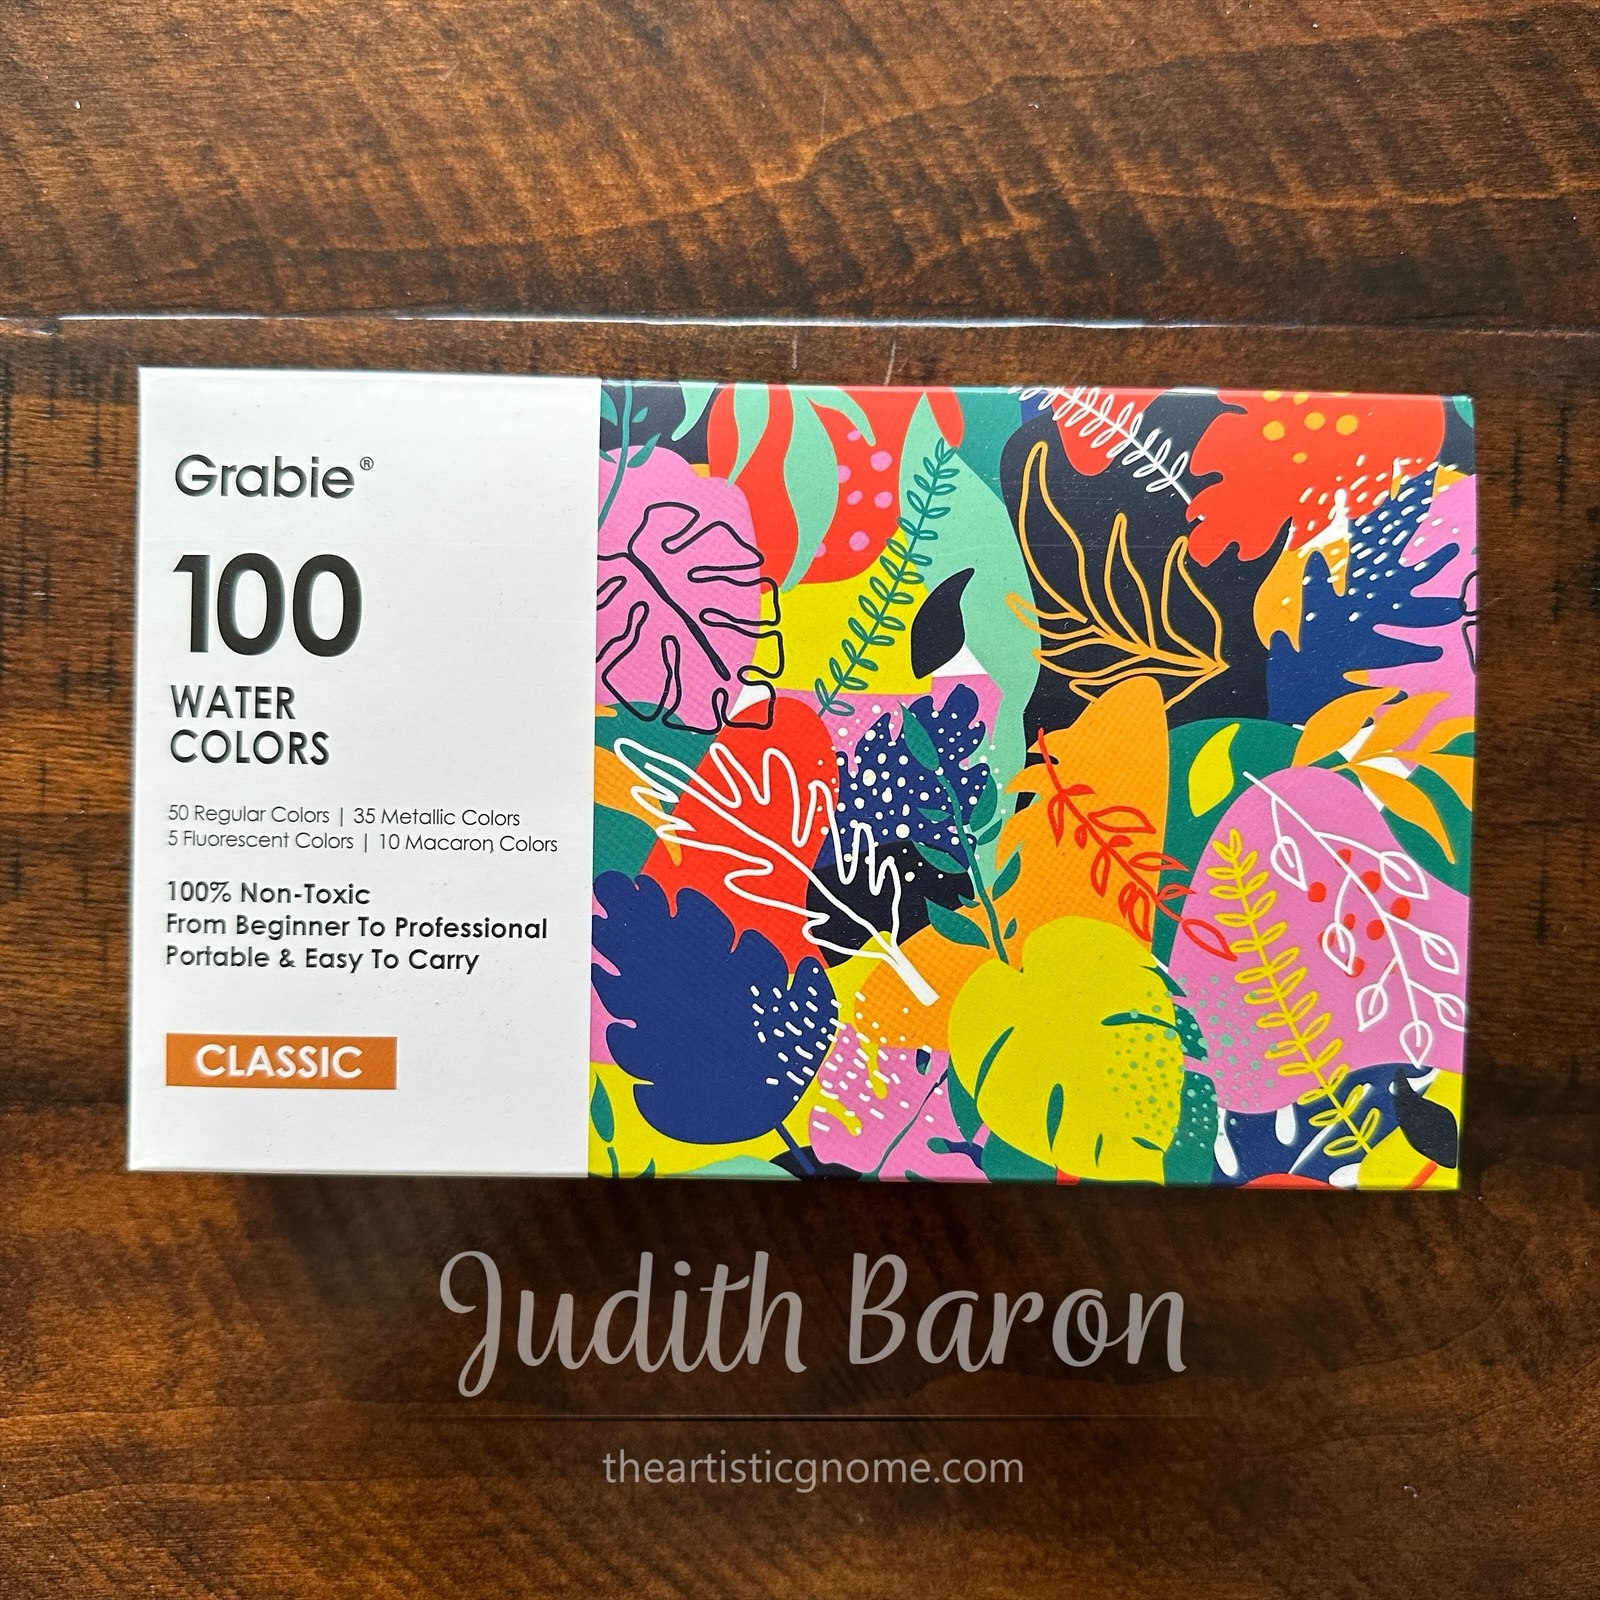 Grabie 100 Watercolours Review - The Artistic Gnome Blog